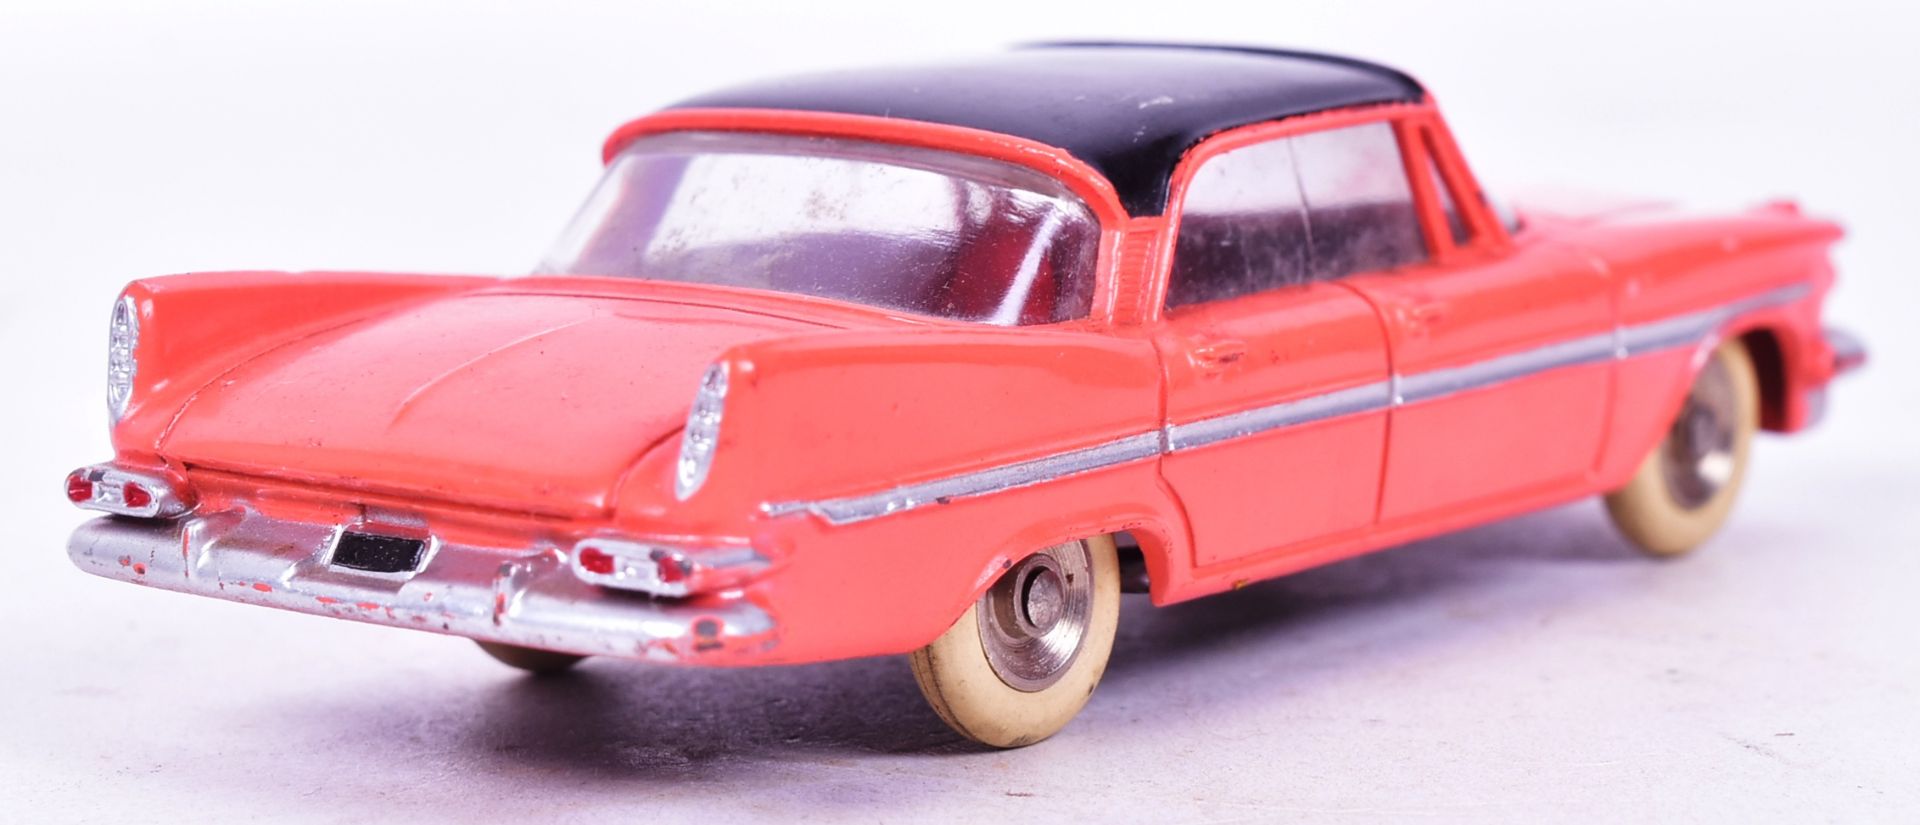 DIECAST - FRENCH DINKY TOYS - DESOTO 59 DIPLOMAT - Image 3 of 5